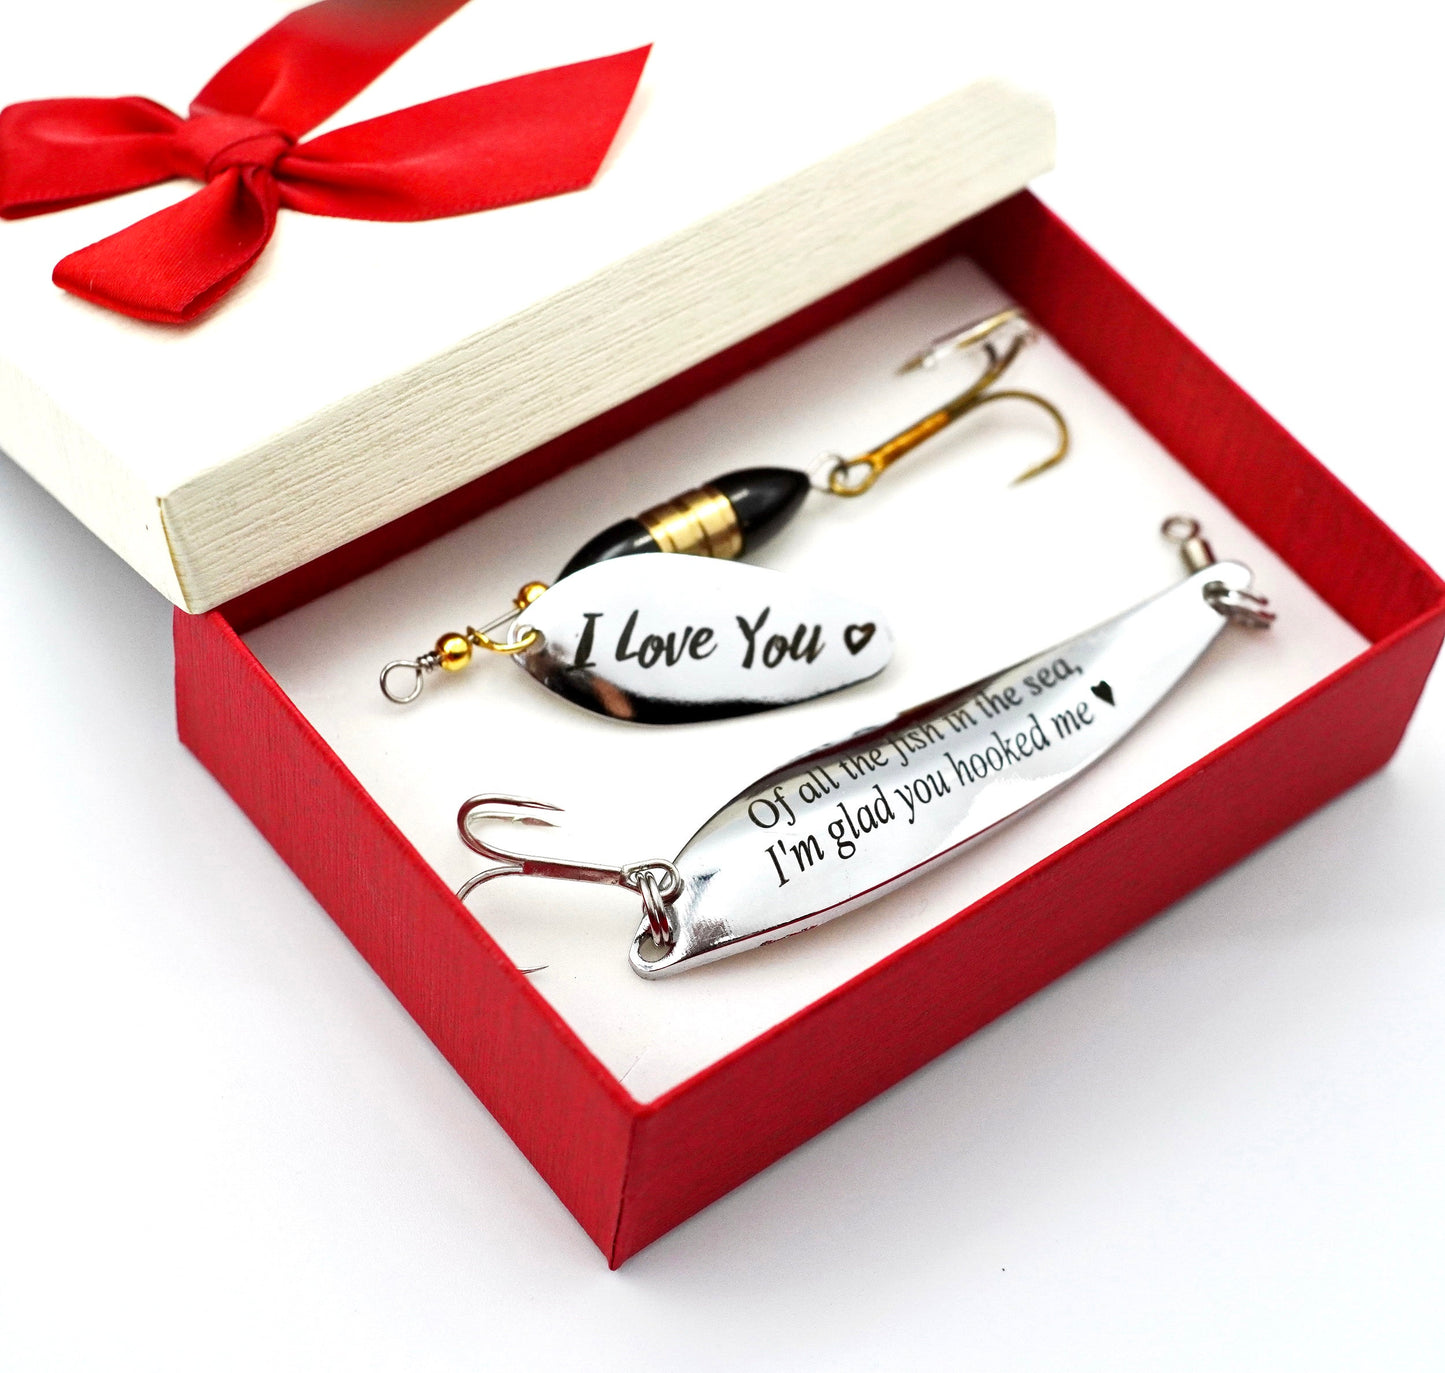 Valentine Gifts for Him, Fishing Lure, Gifts for Him, Gifts for Boyfriend,  Boyfriend Gift, Personalized Fishing Lure, Natashaaloha 